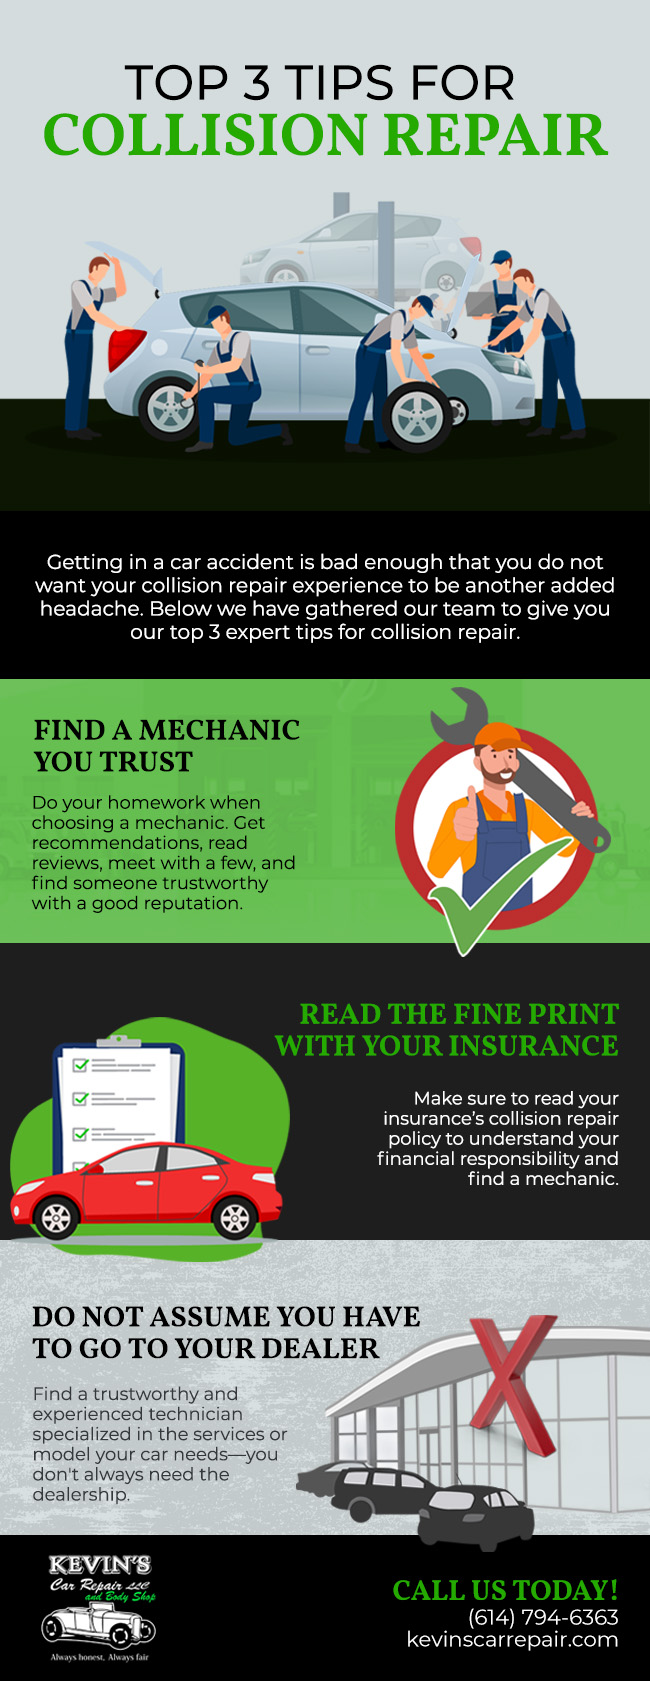 Top 3 Tips for Collision Repair